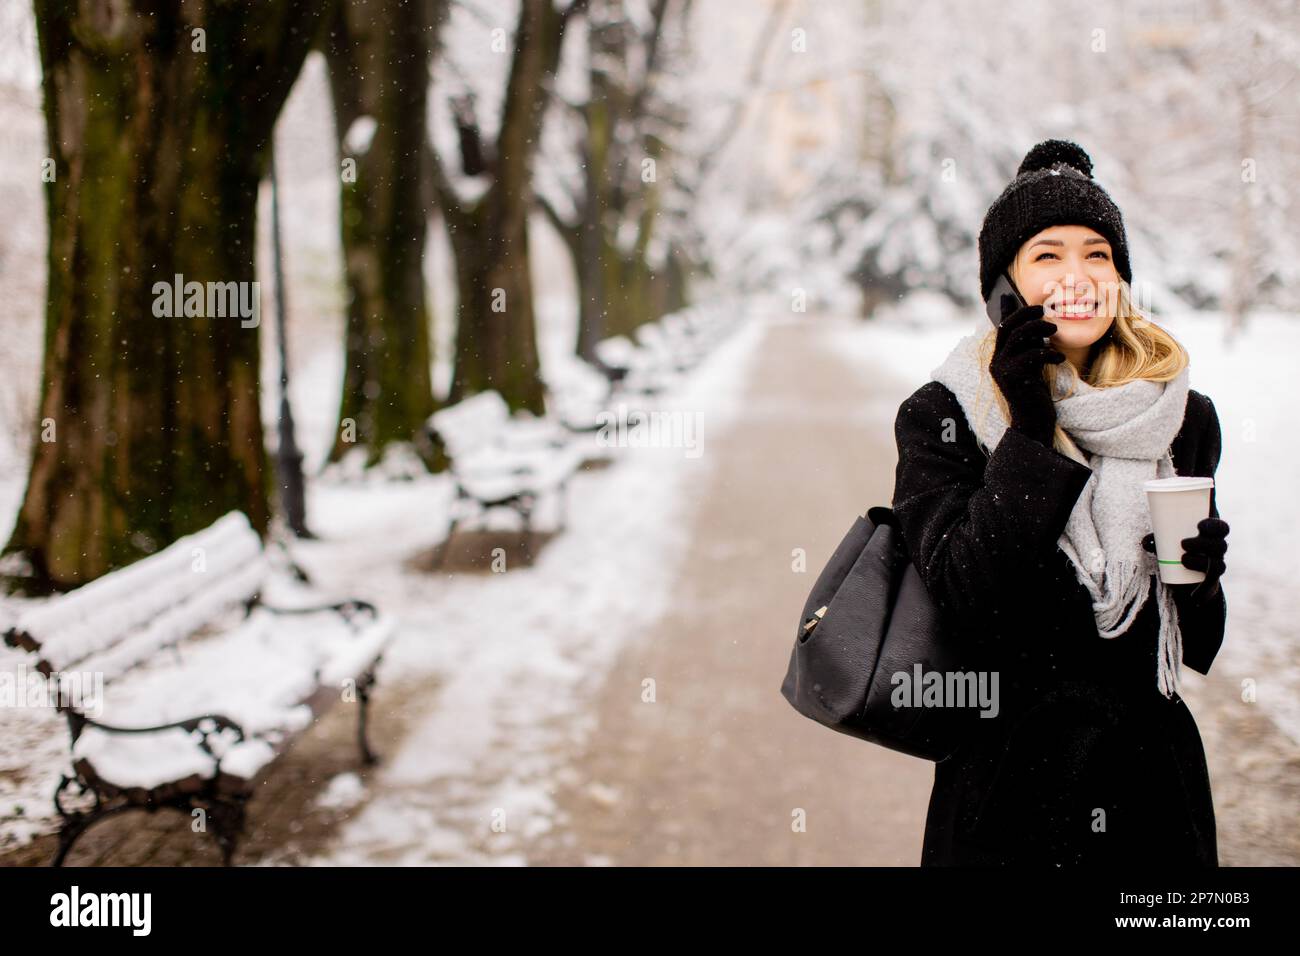 A young woman wearing warm winter clothes and a knit hat smiles happily as she stands in the snow and using mobile phone whil holding cofee cup Stock Photo